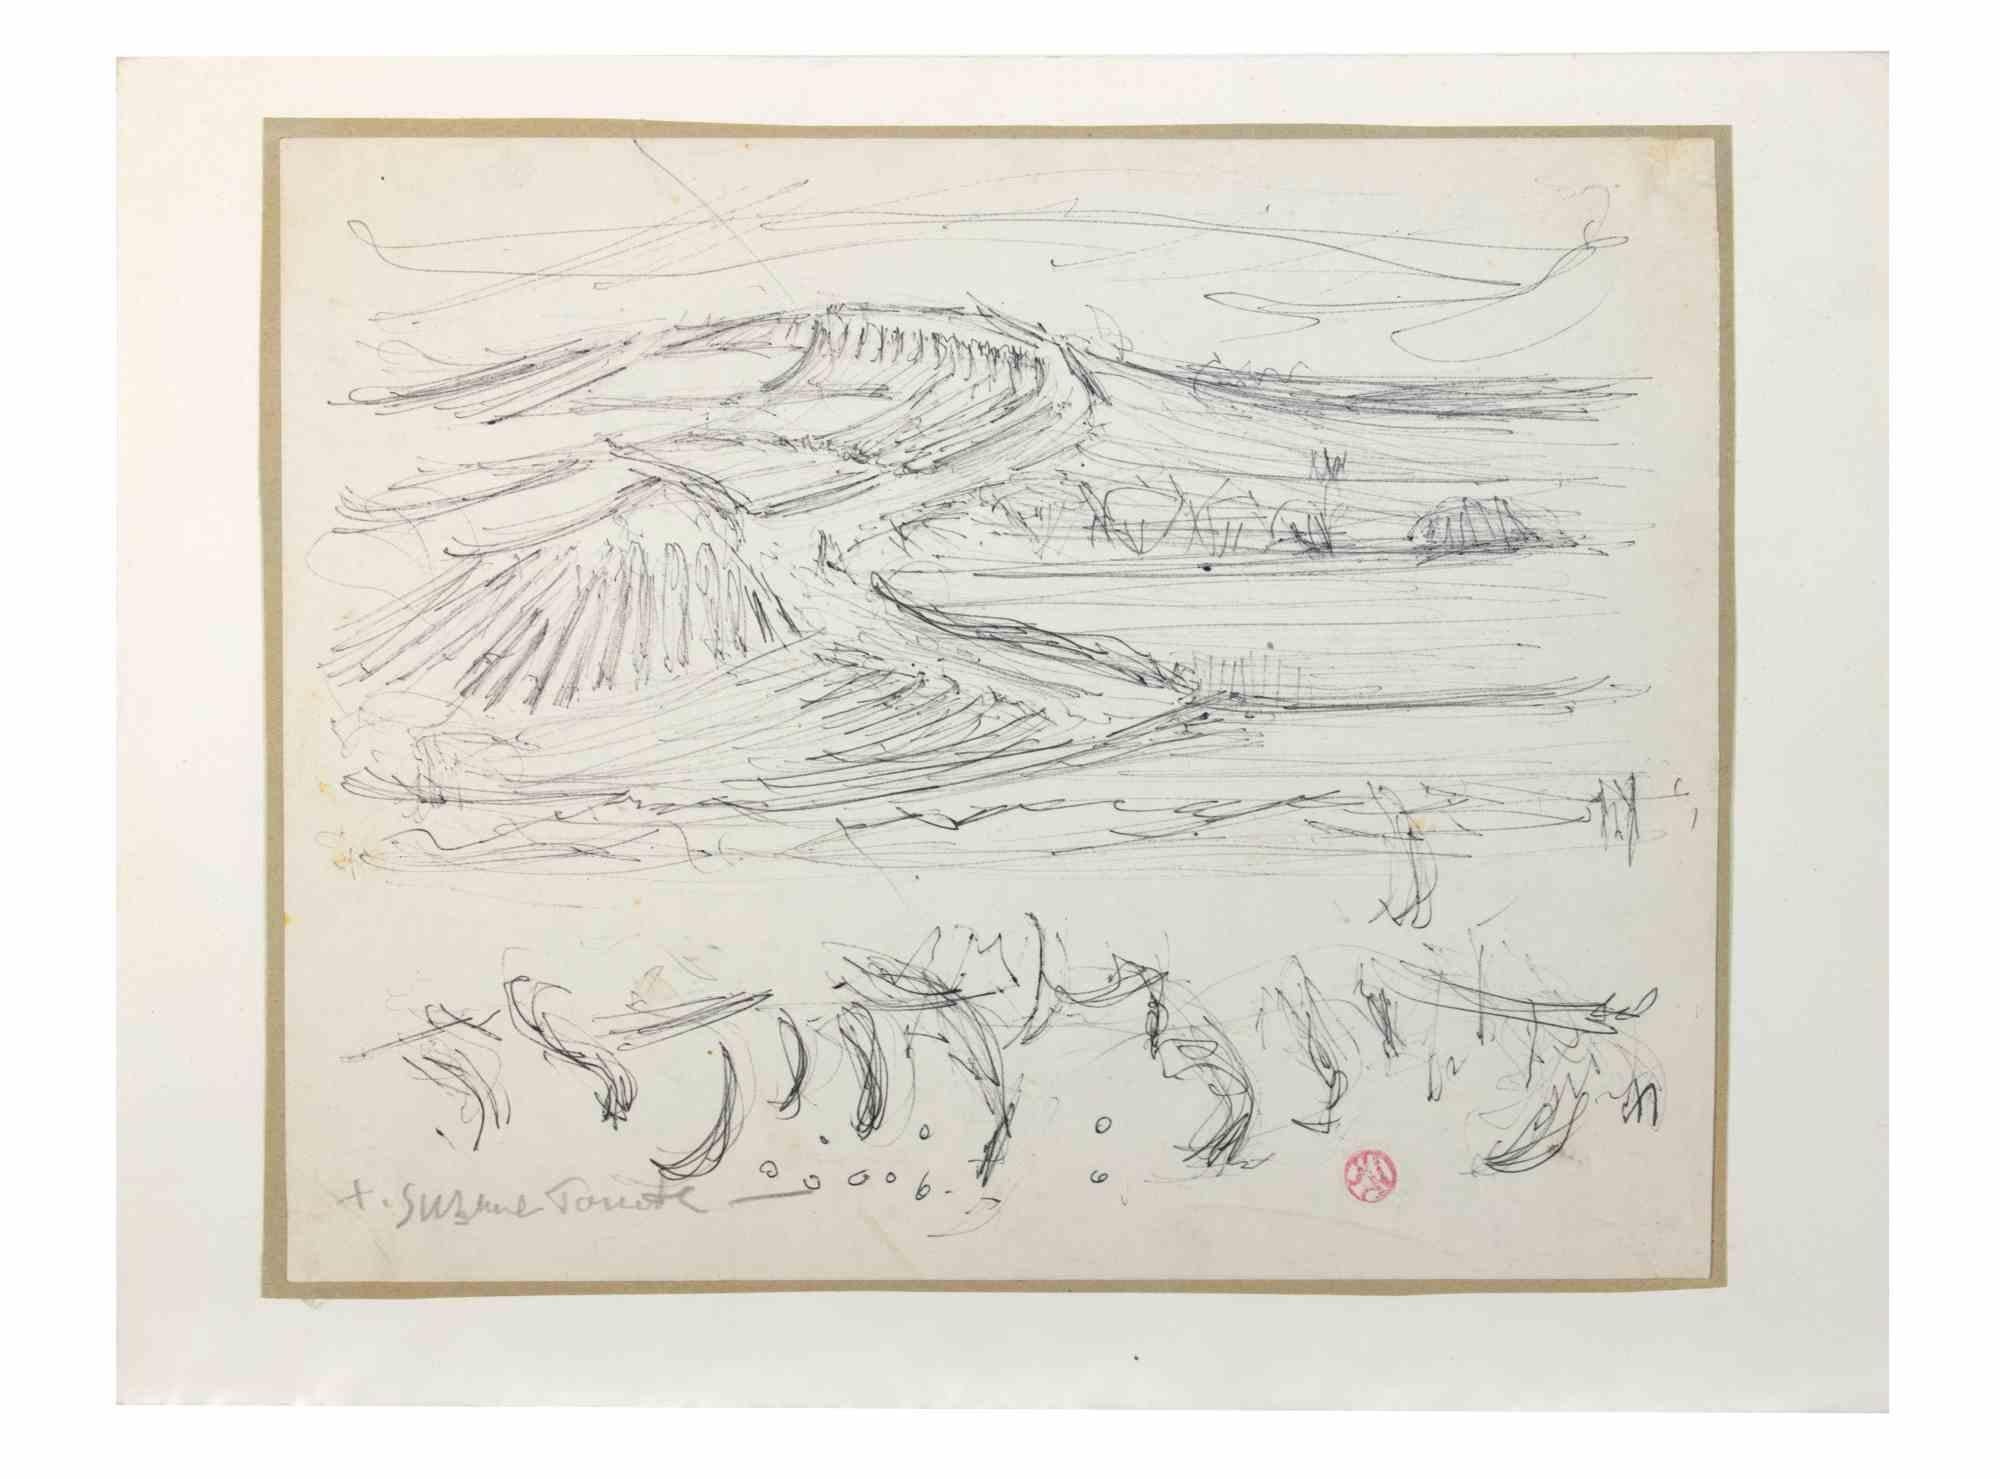 Landscape is an artwork realized bySuzanne Tourte, in 1940s. 

Pen on paper, 25 x 33 cm.

Handsigned in the lower right part and stamp on the right margin.

Good conditions except for some yellowing on paper, due to time.